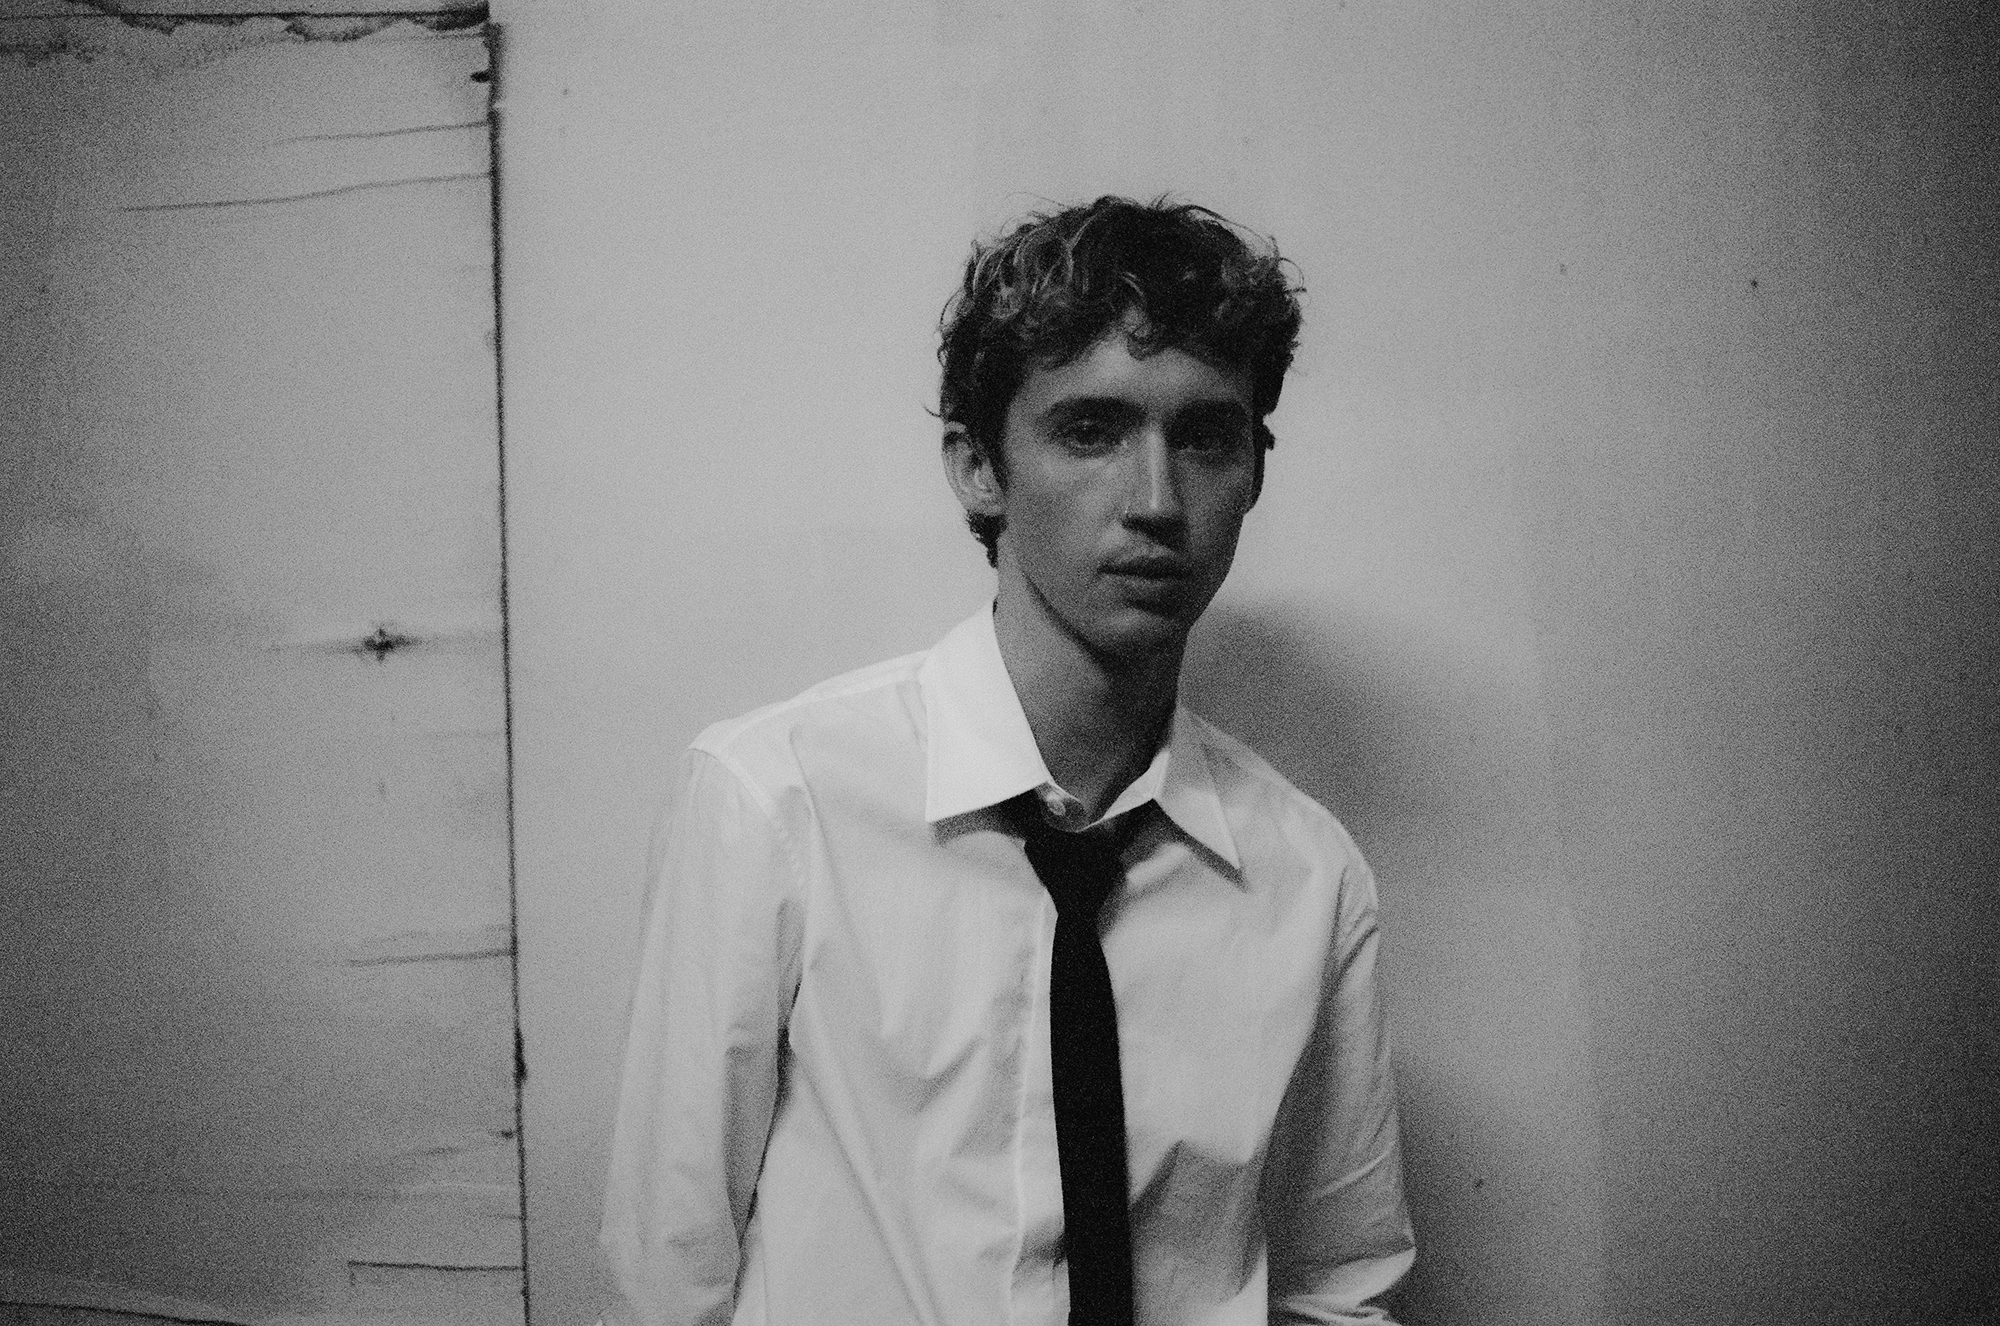 Troye Sivan stands against a wall wearing a shirt and loose-fitting tie